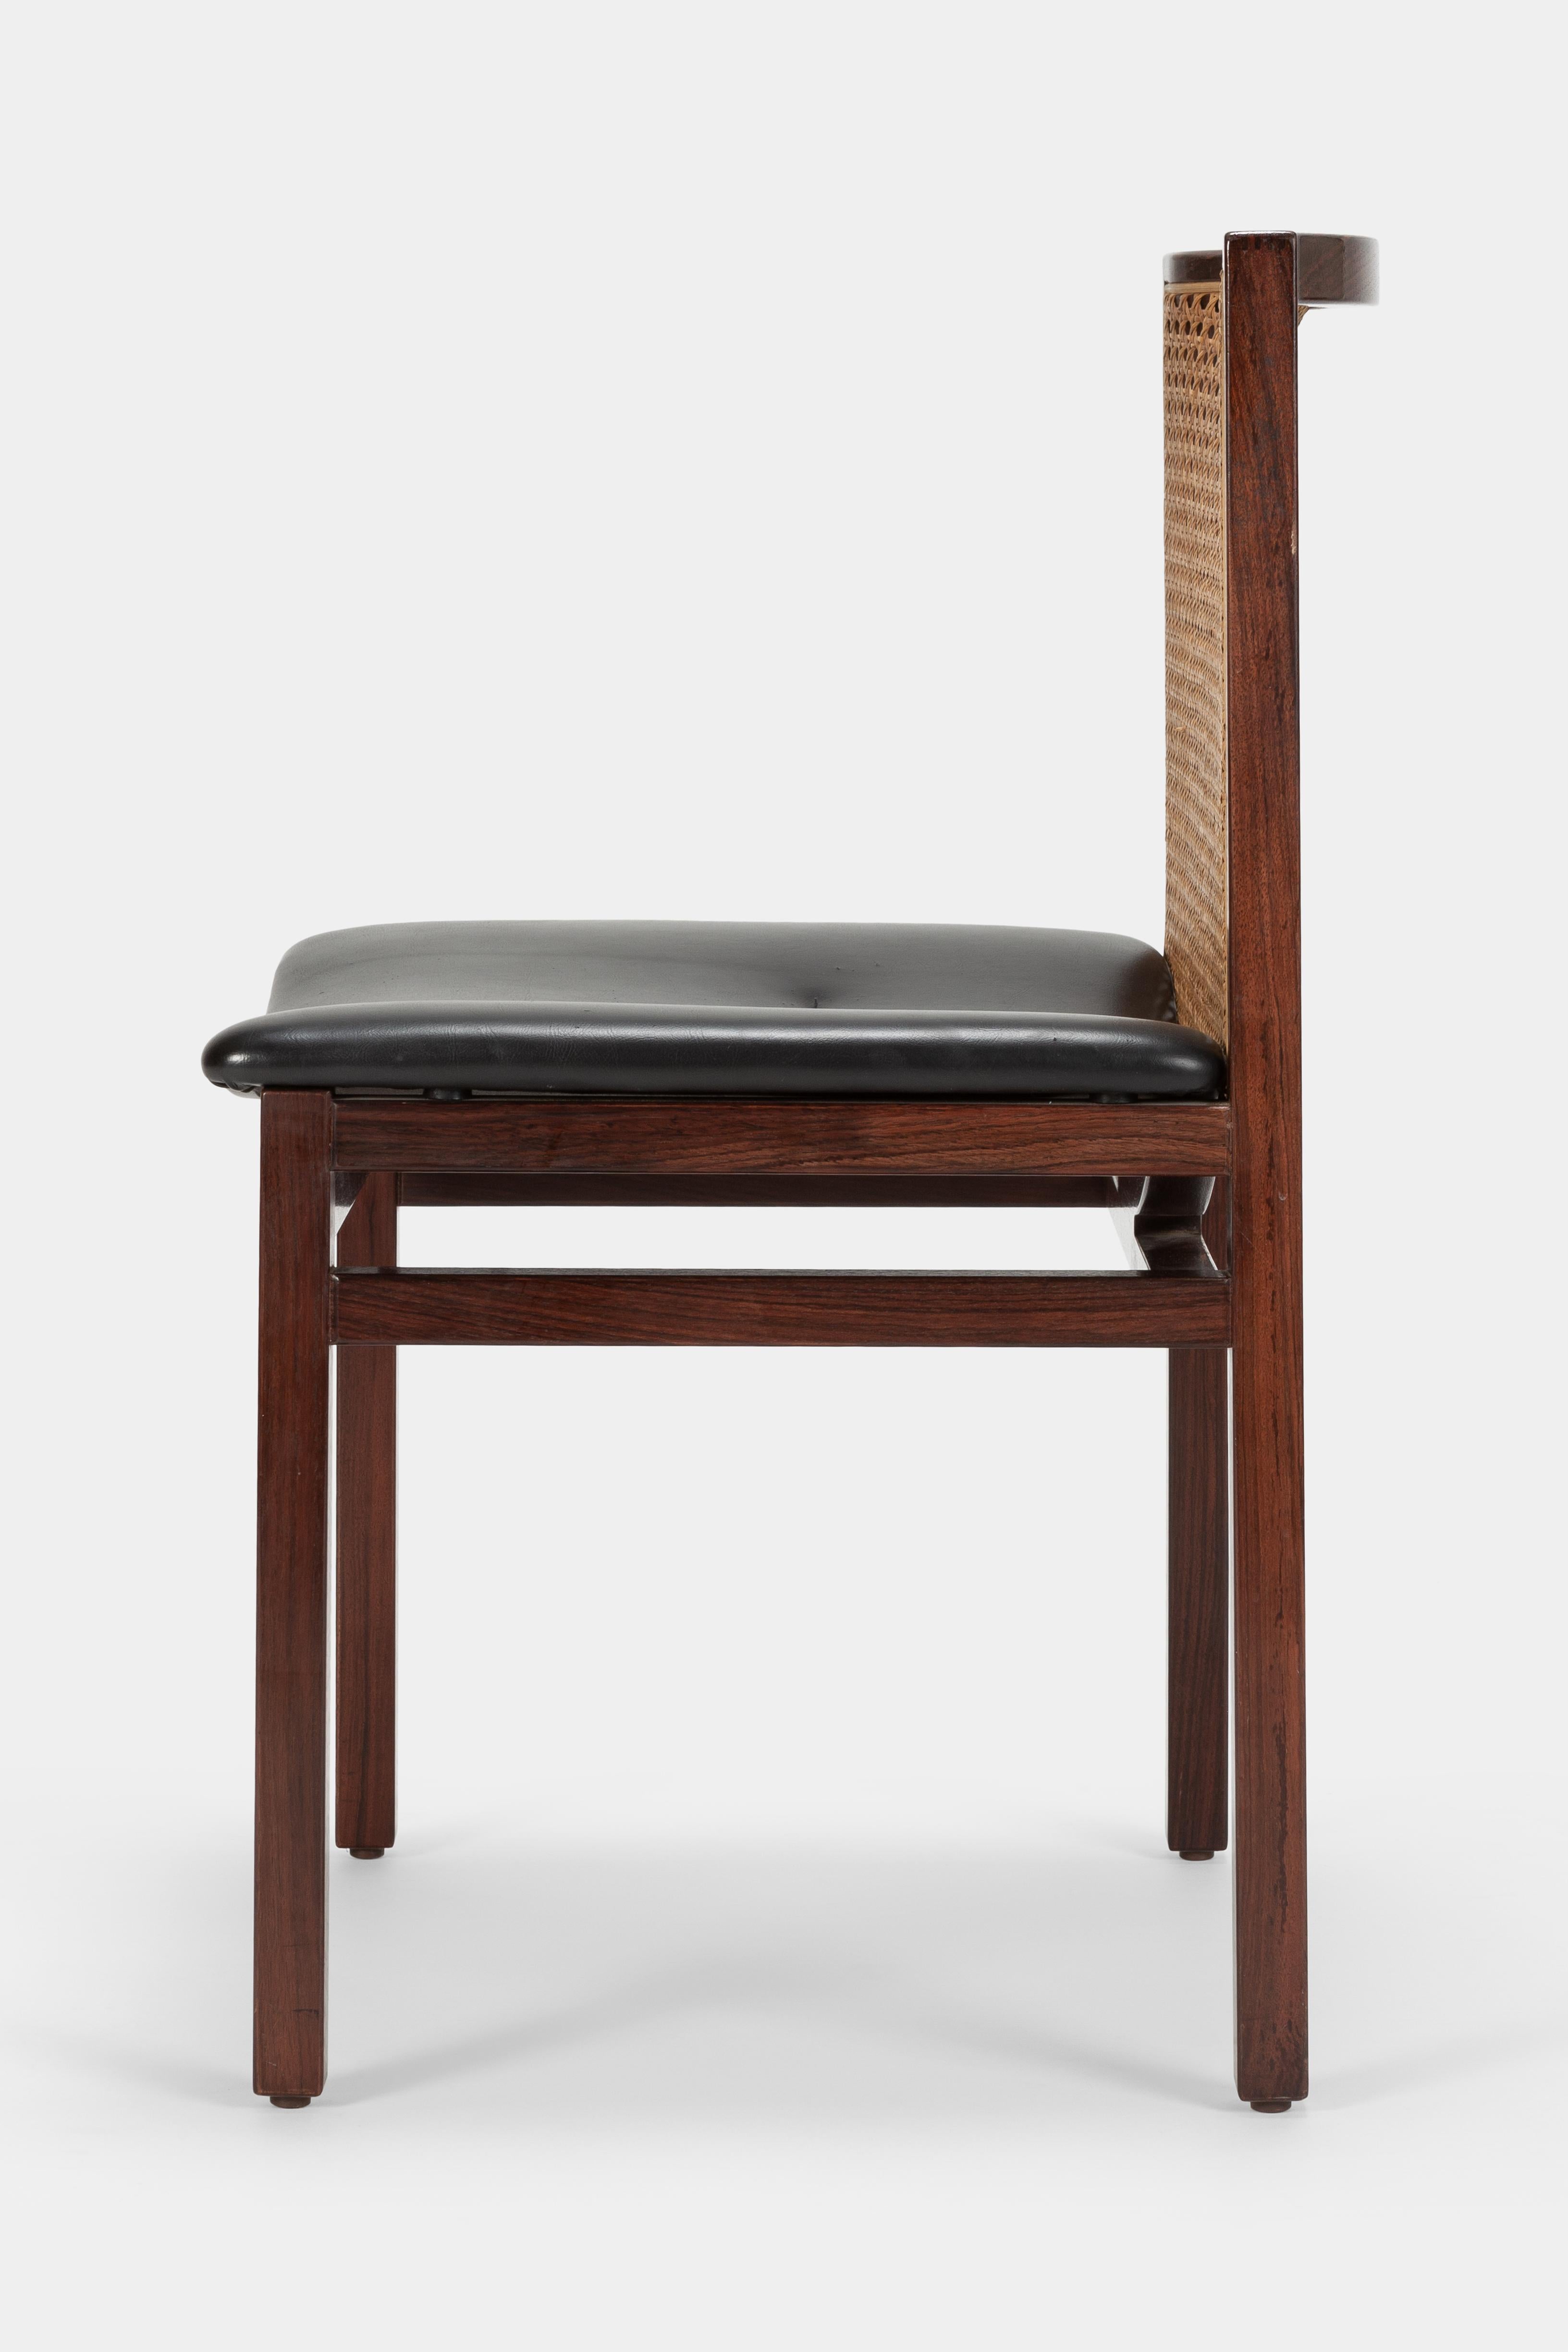 6 Tito Agnoli Rosewood Dining Room Chairs La Linea, 1960s In Good Condition In Basel, CH